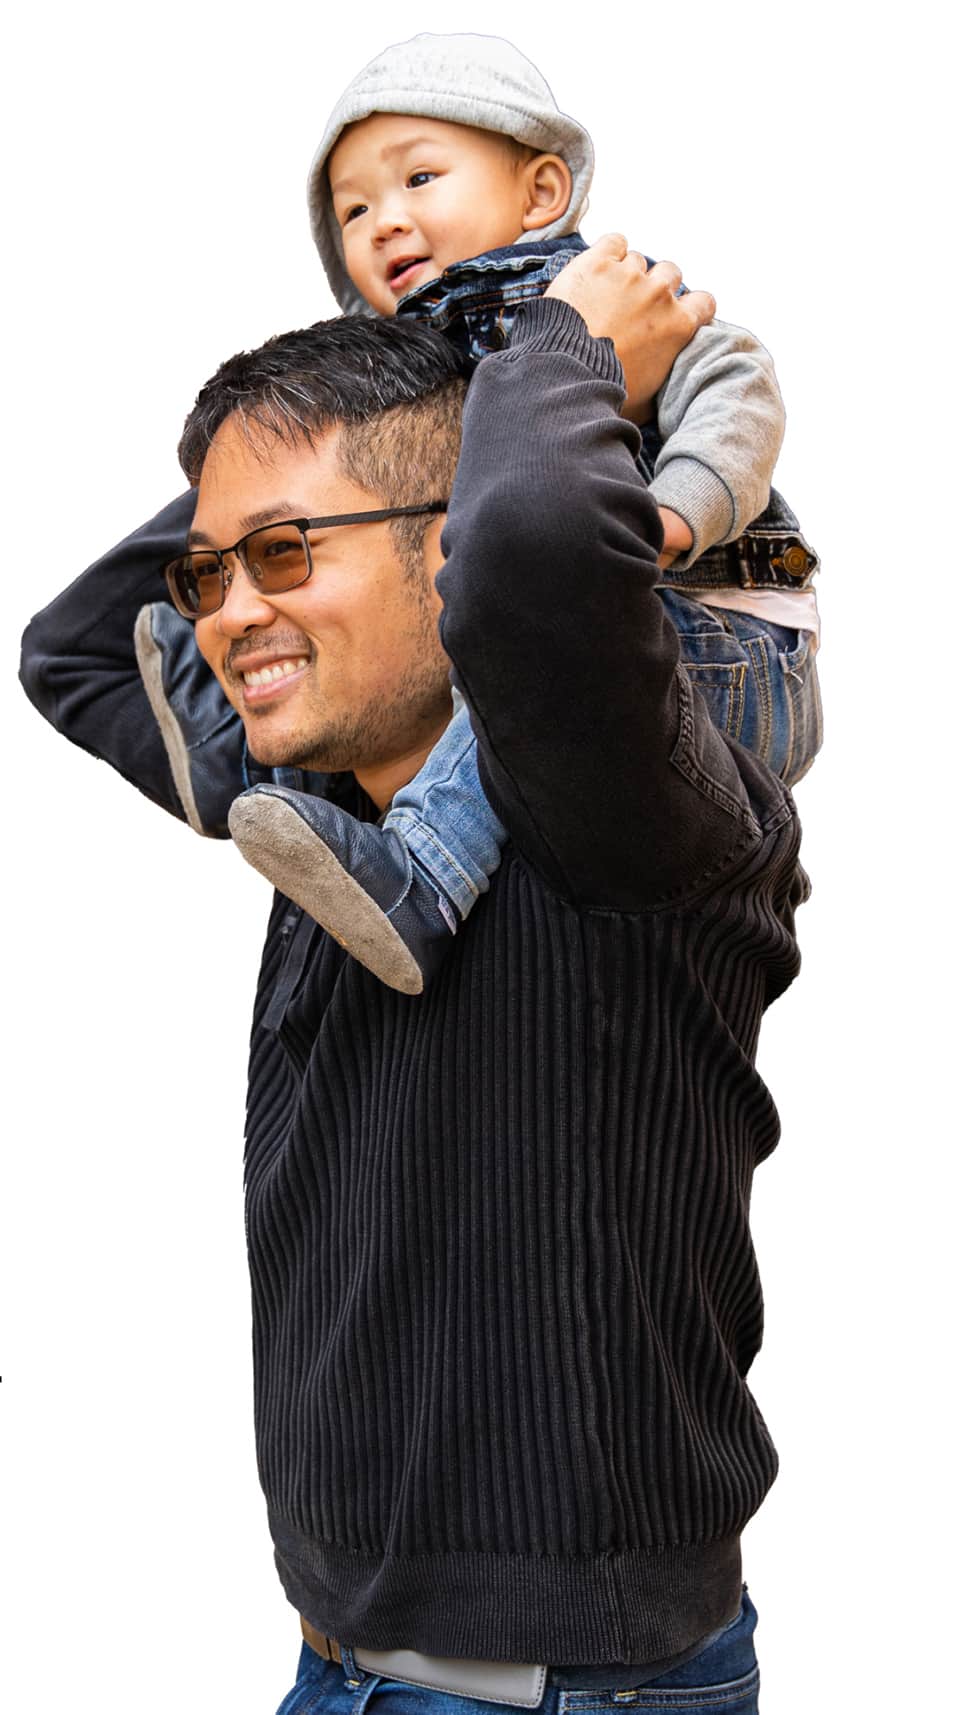 Son on father's shoulders